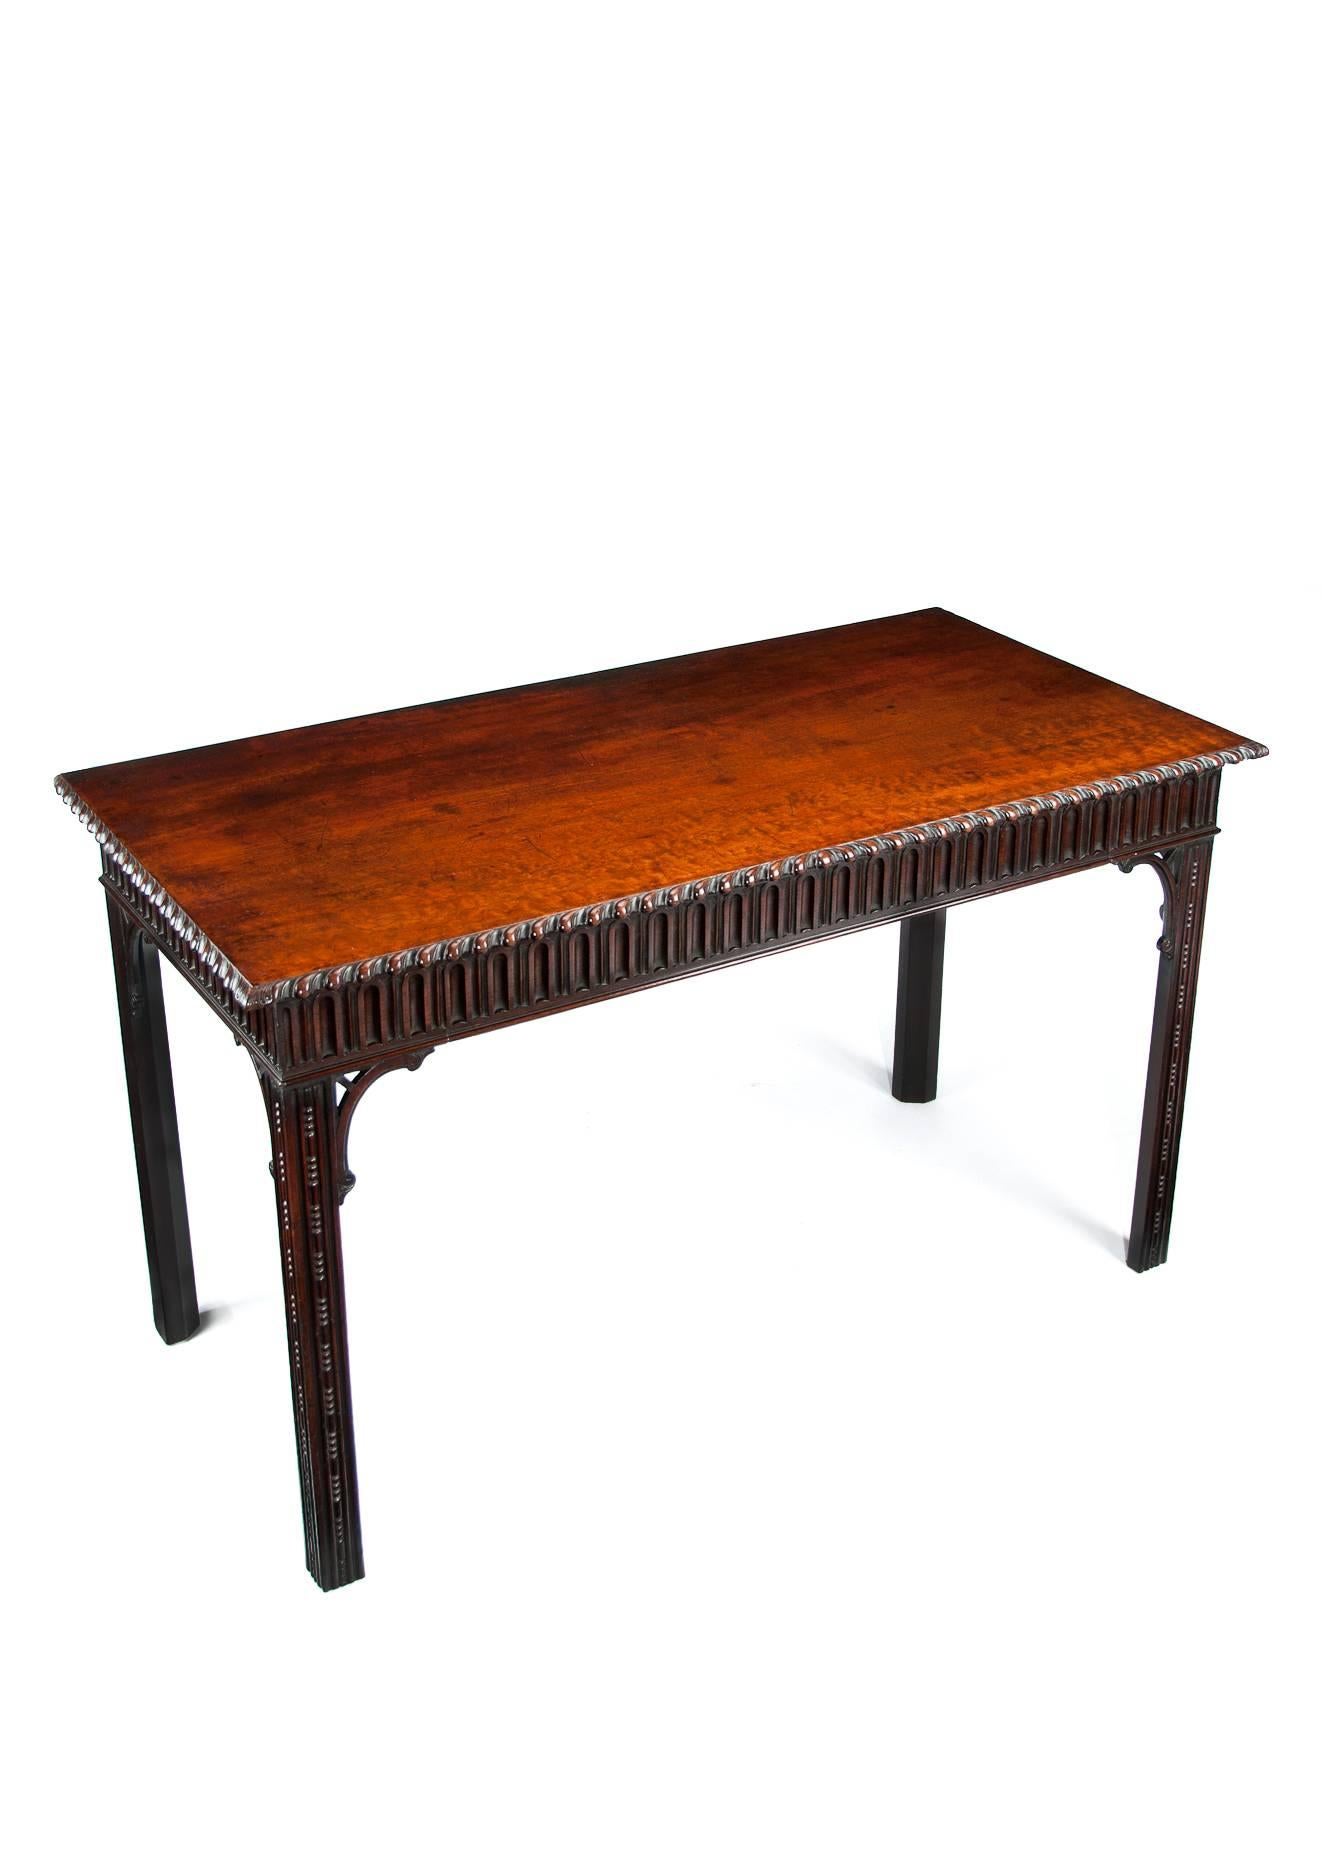 Early 19th century Georgian Mahogany console - serving table, W.Williamson & Sons, Guildford (1790-1840) Provenance Lord and Lady of Hall Place
This finely coloured and superb quality antique console, side or serving table stamped W.Williamson &